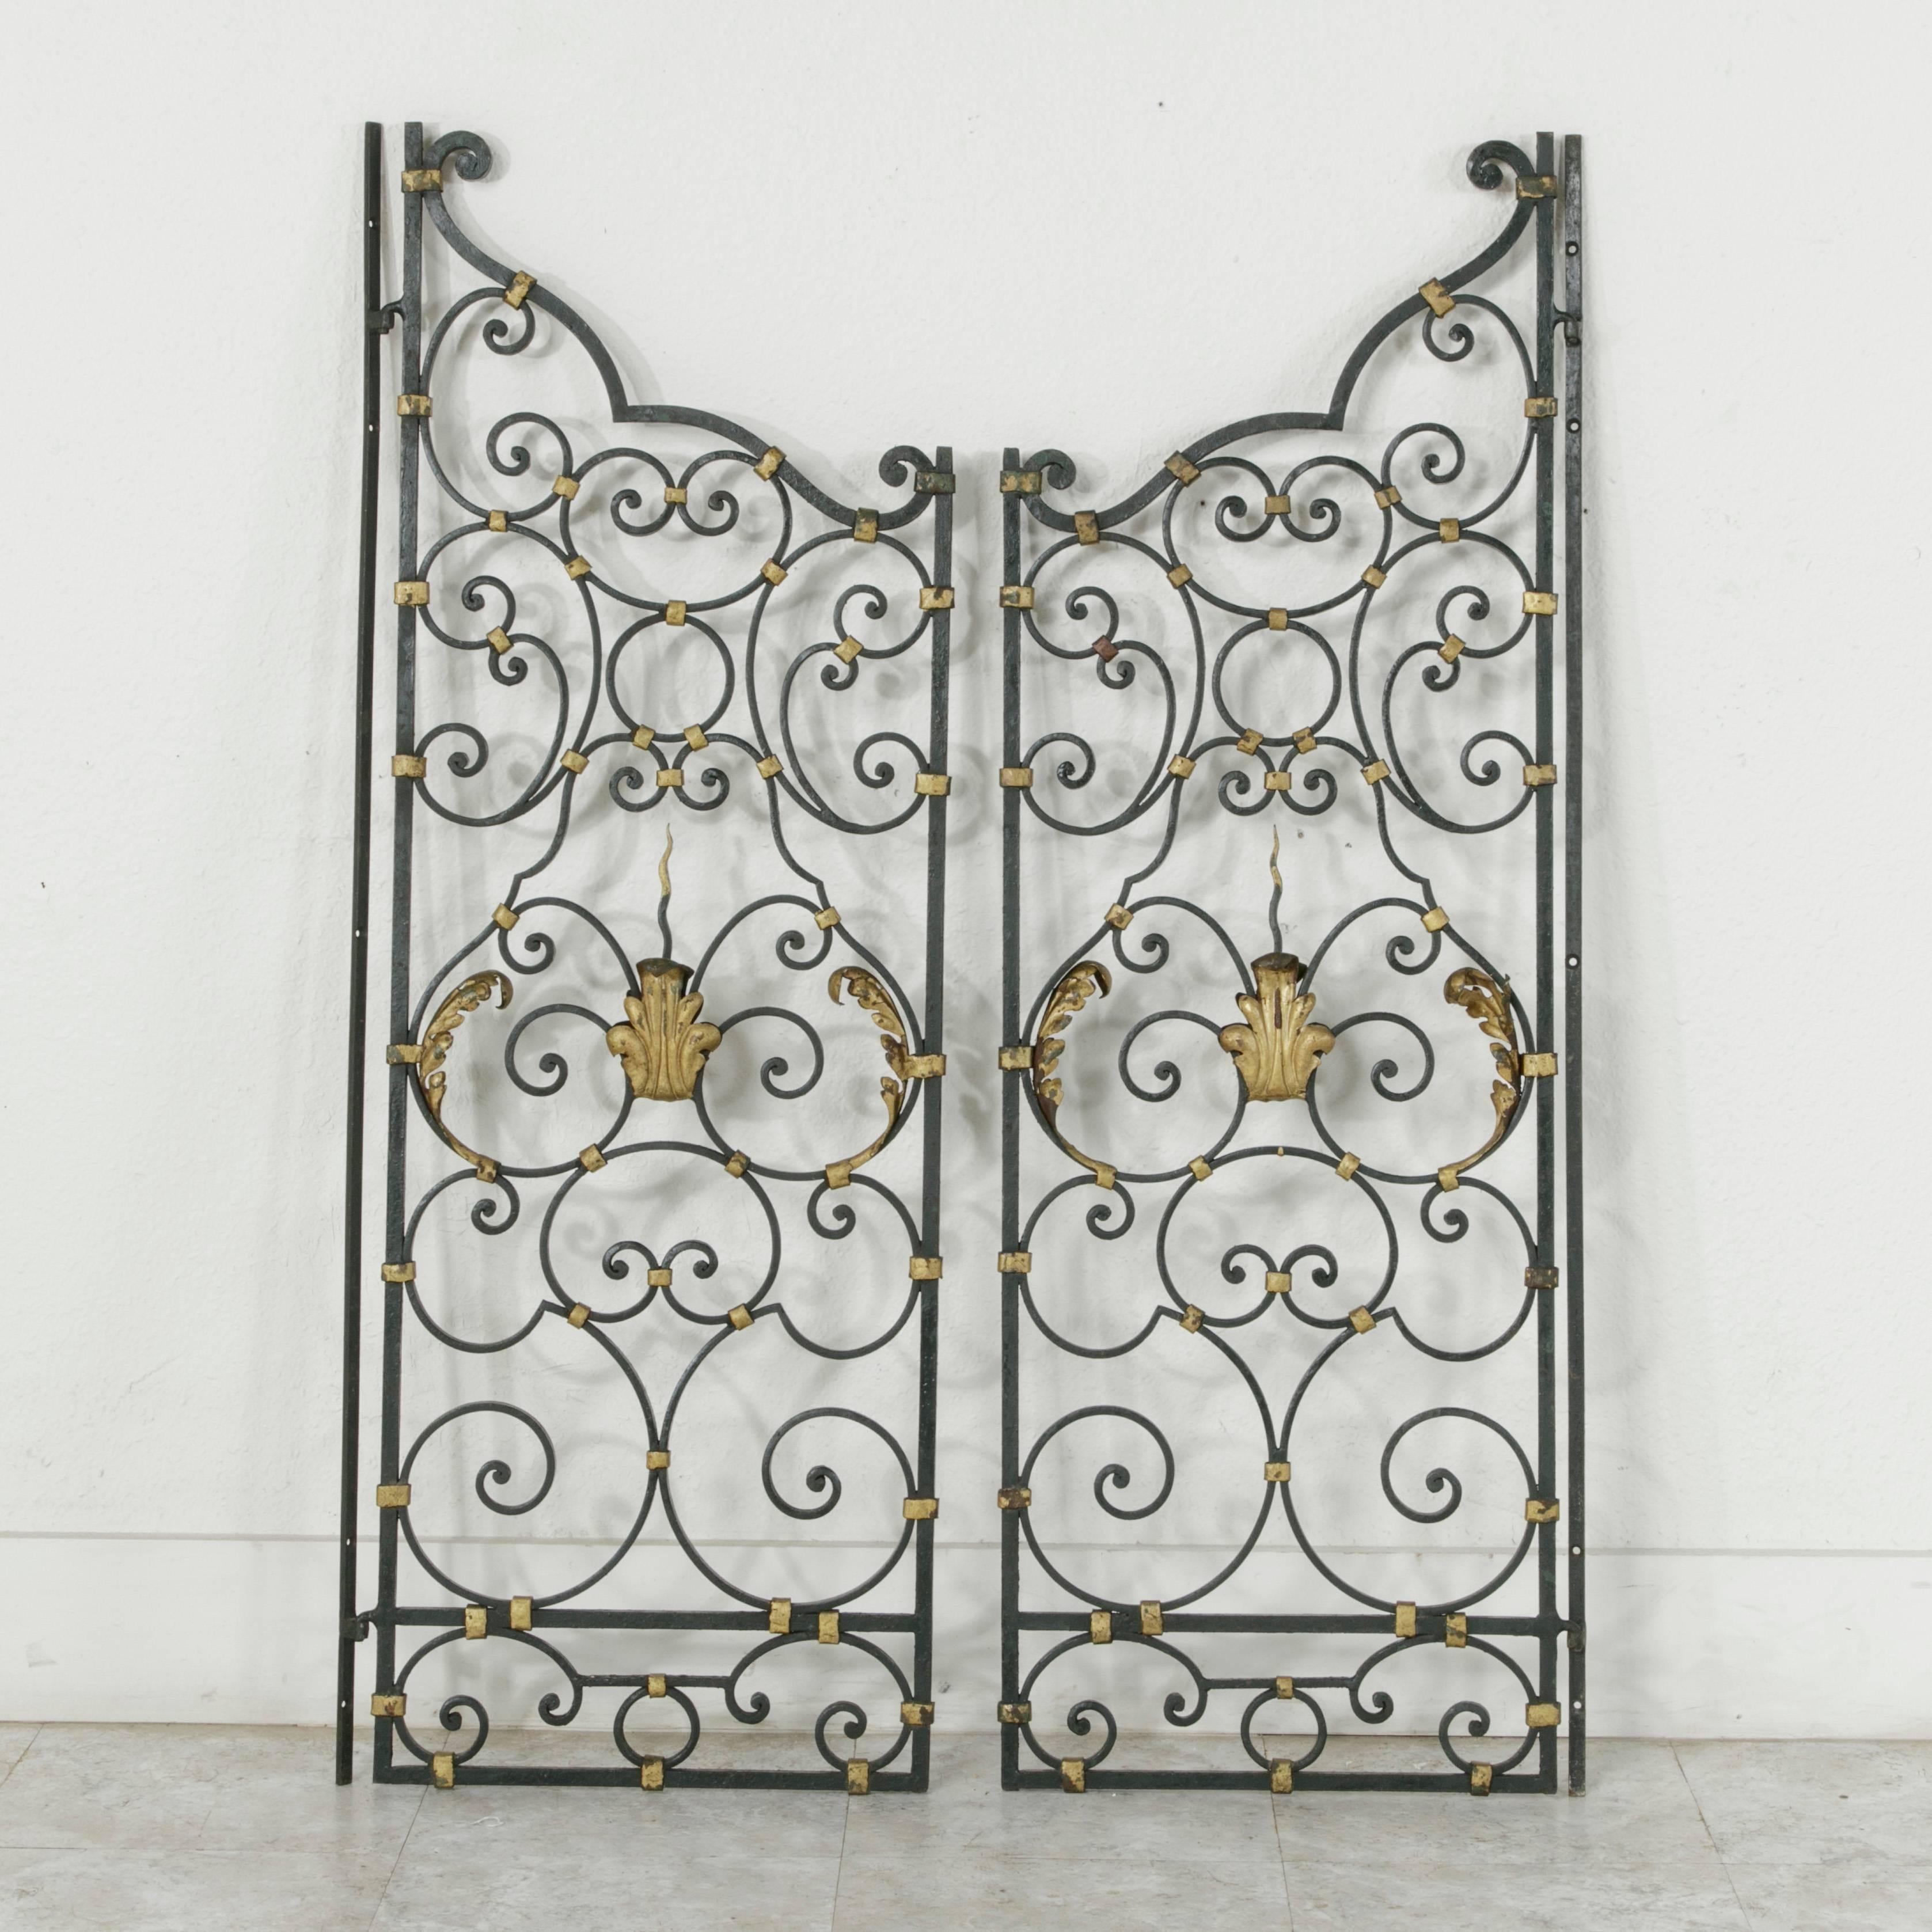 Exuding elegance and mastery of the craft of the iron worker, this pair of 19th century hand-forged iron gates with gold detailed banding is double faced with gilt acanthus leaves. Ready to make an impressive entryway into the garden, these gates